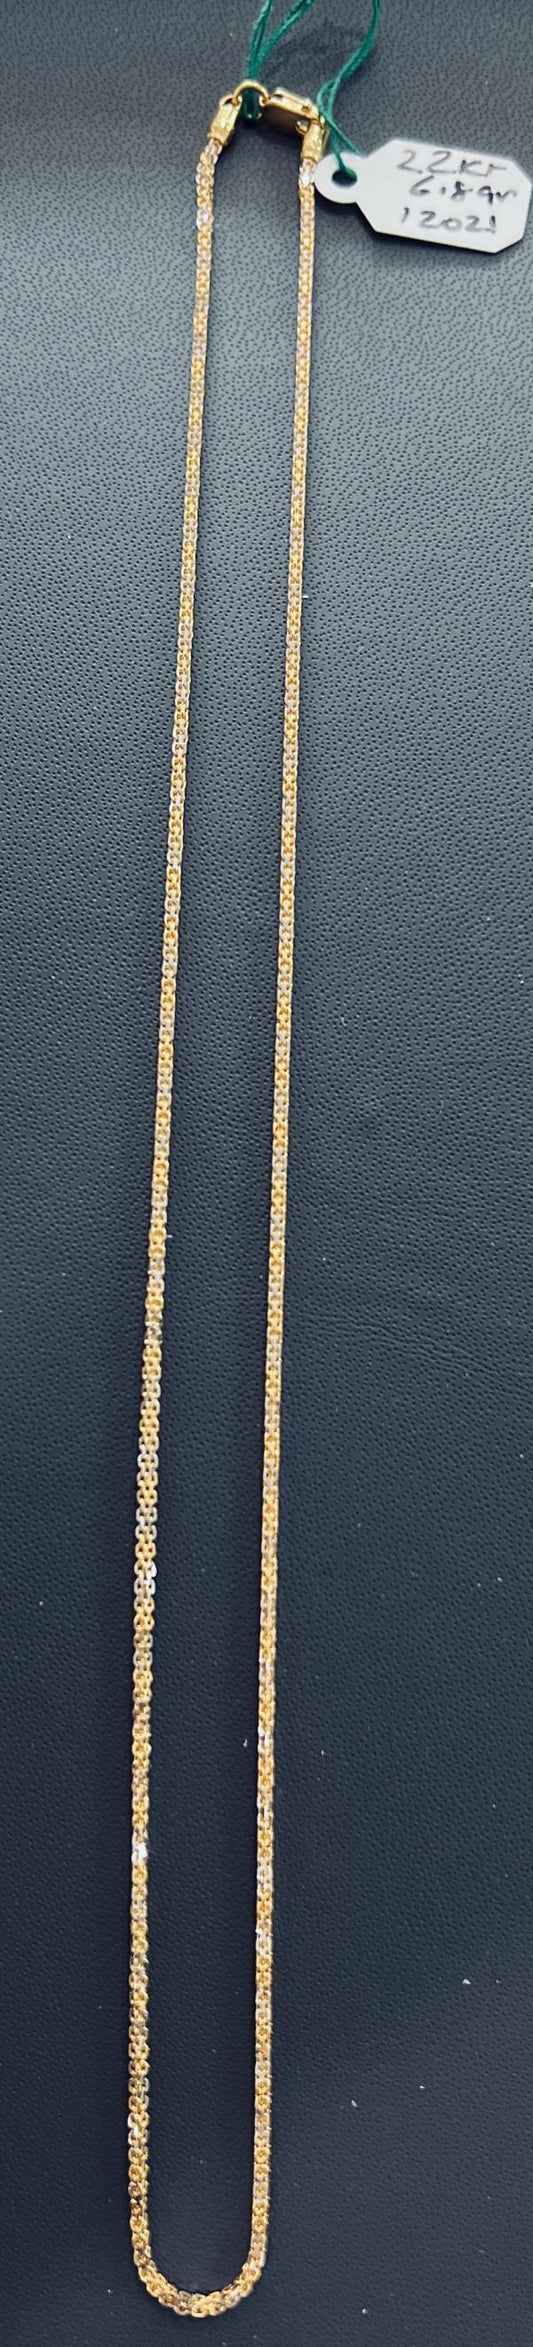 22KT GOLD CHAIN 16" 6.8GM